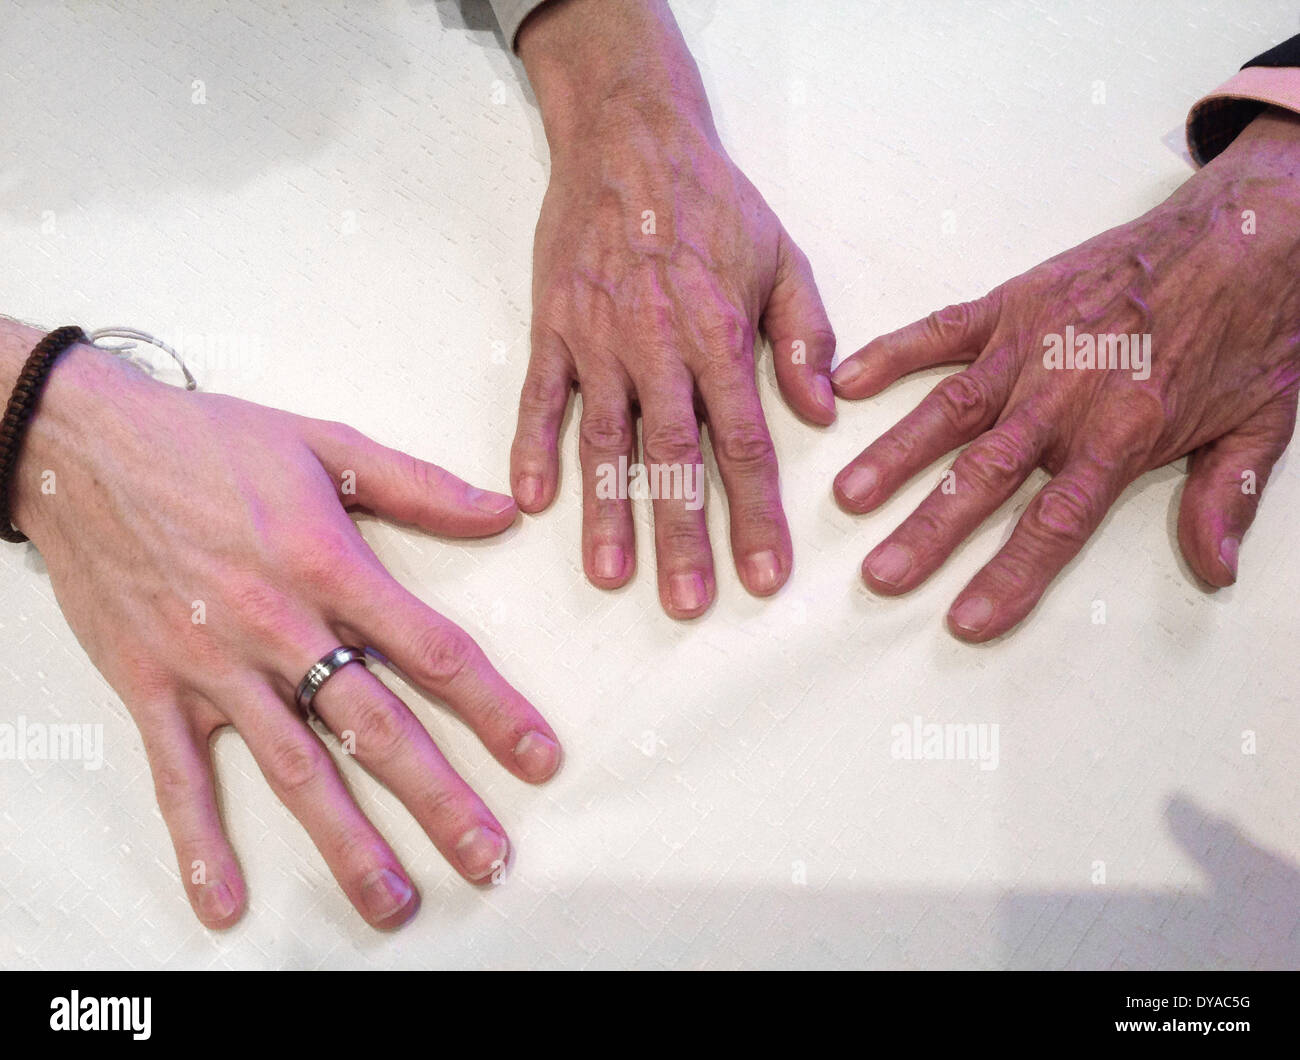 The hands of grandfather, son and grandson on a table. April 2014 Stock Photo